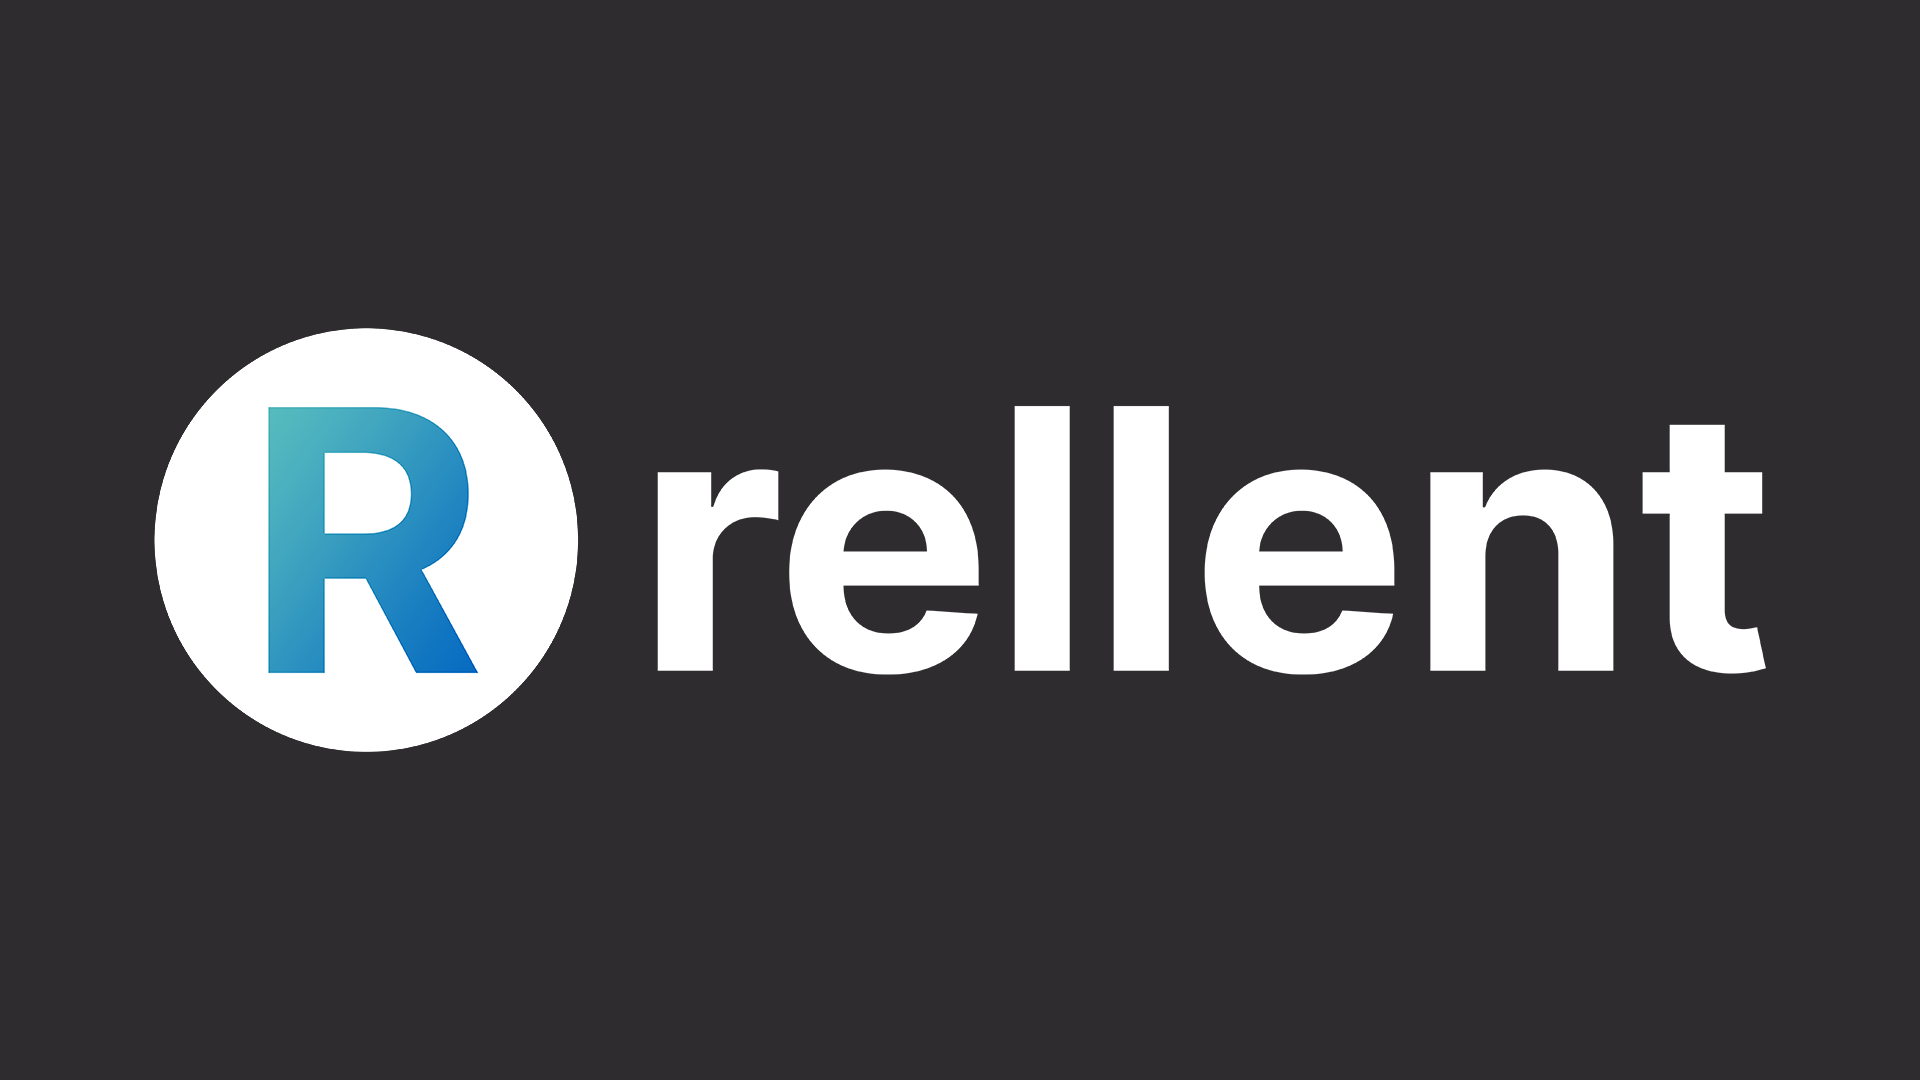 Introducing Rellent – our new brand